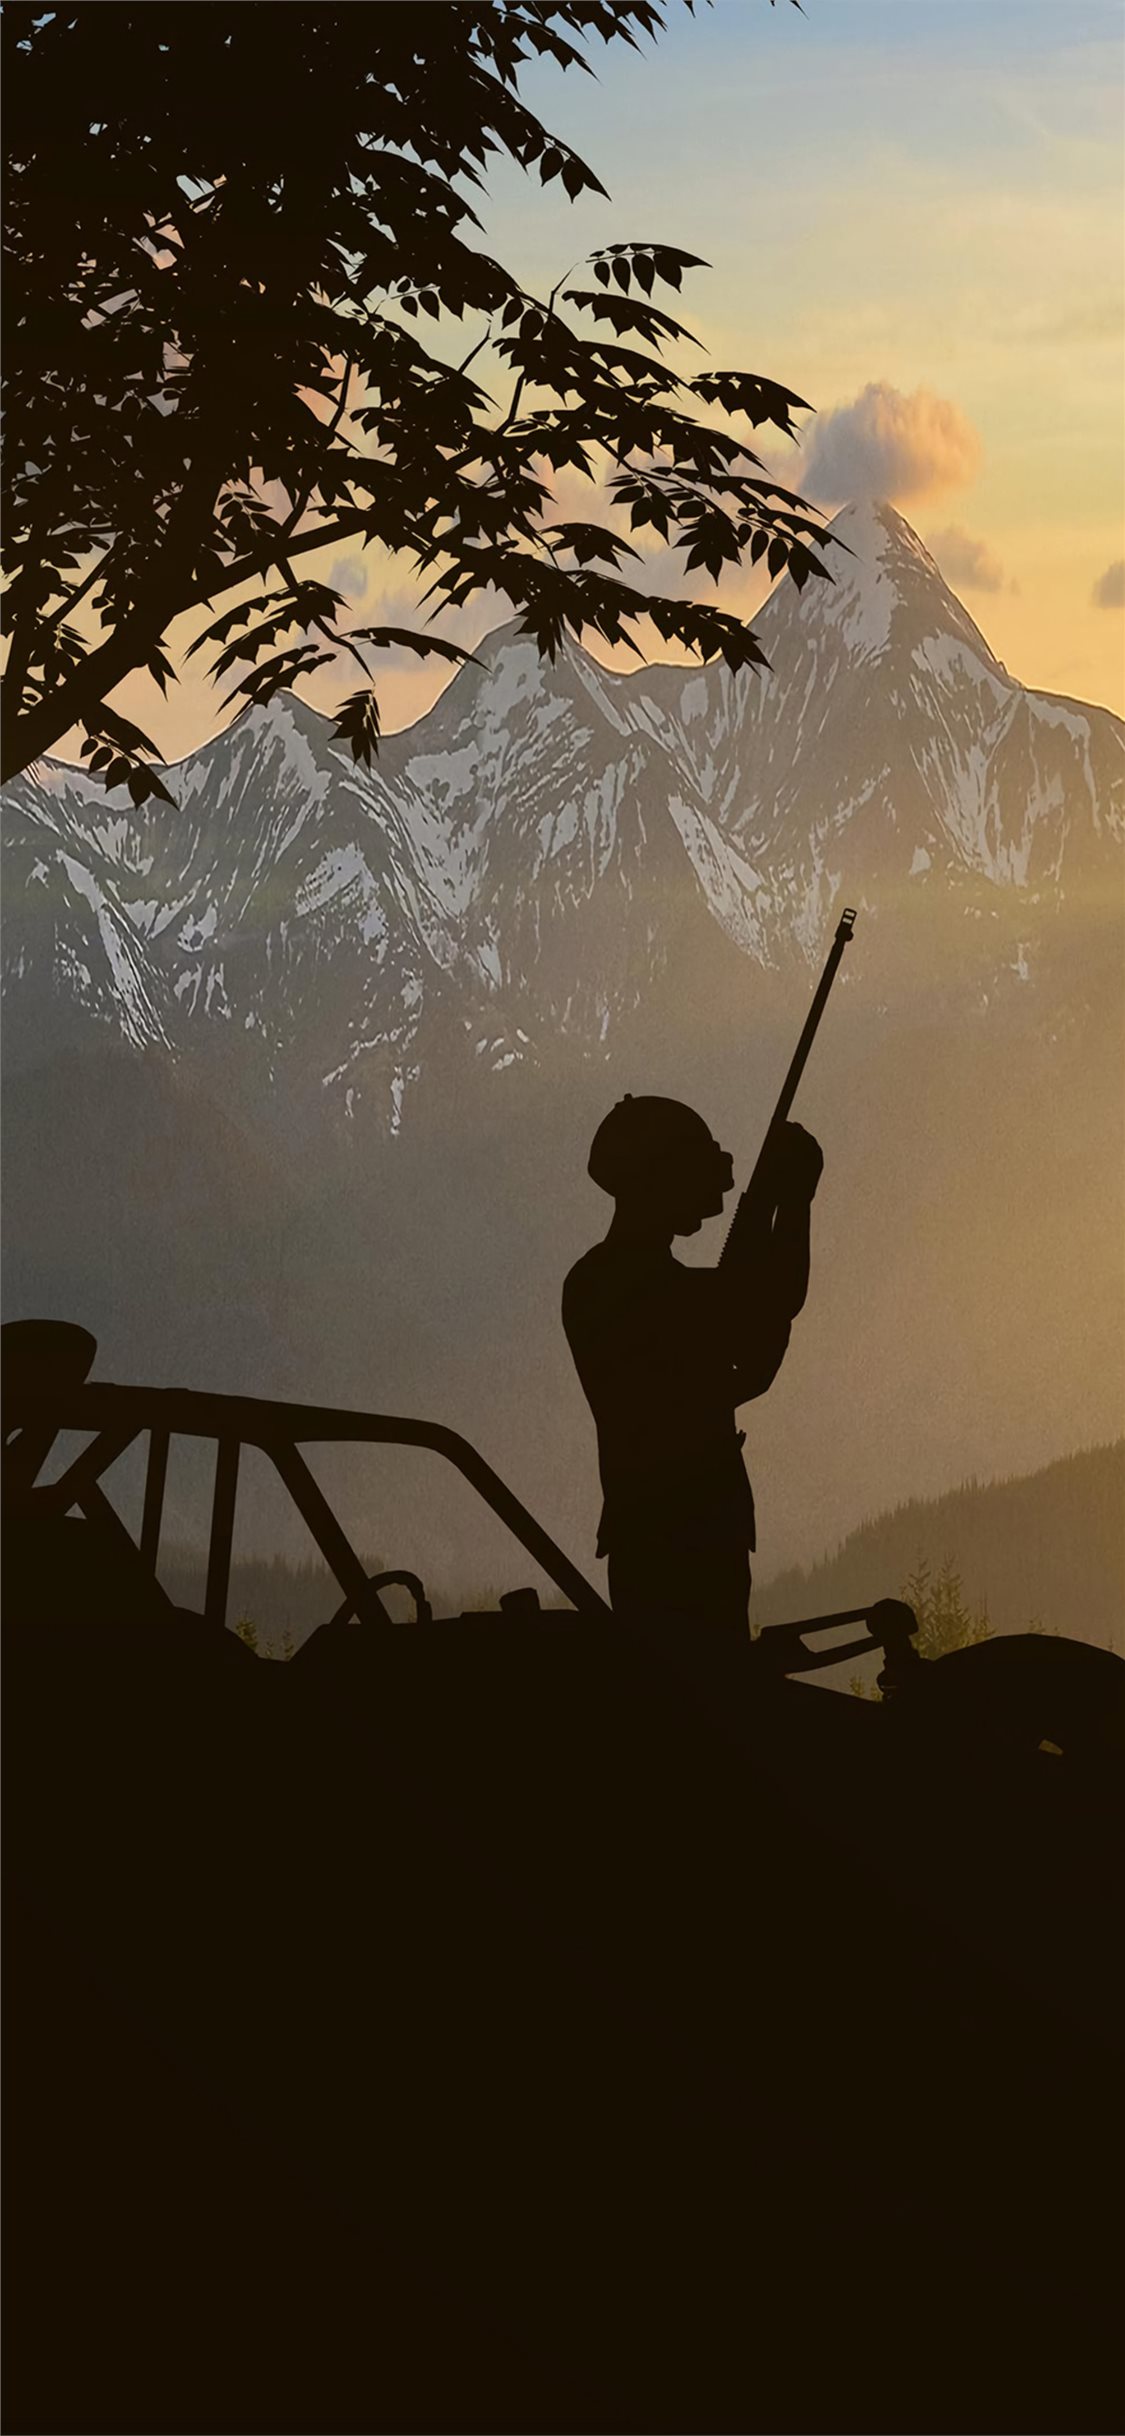 Pubg Silhouette 4k Iphone X Wallpapers Free Download